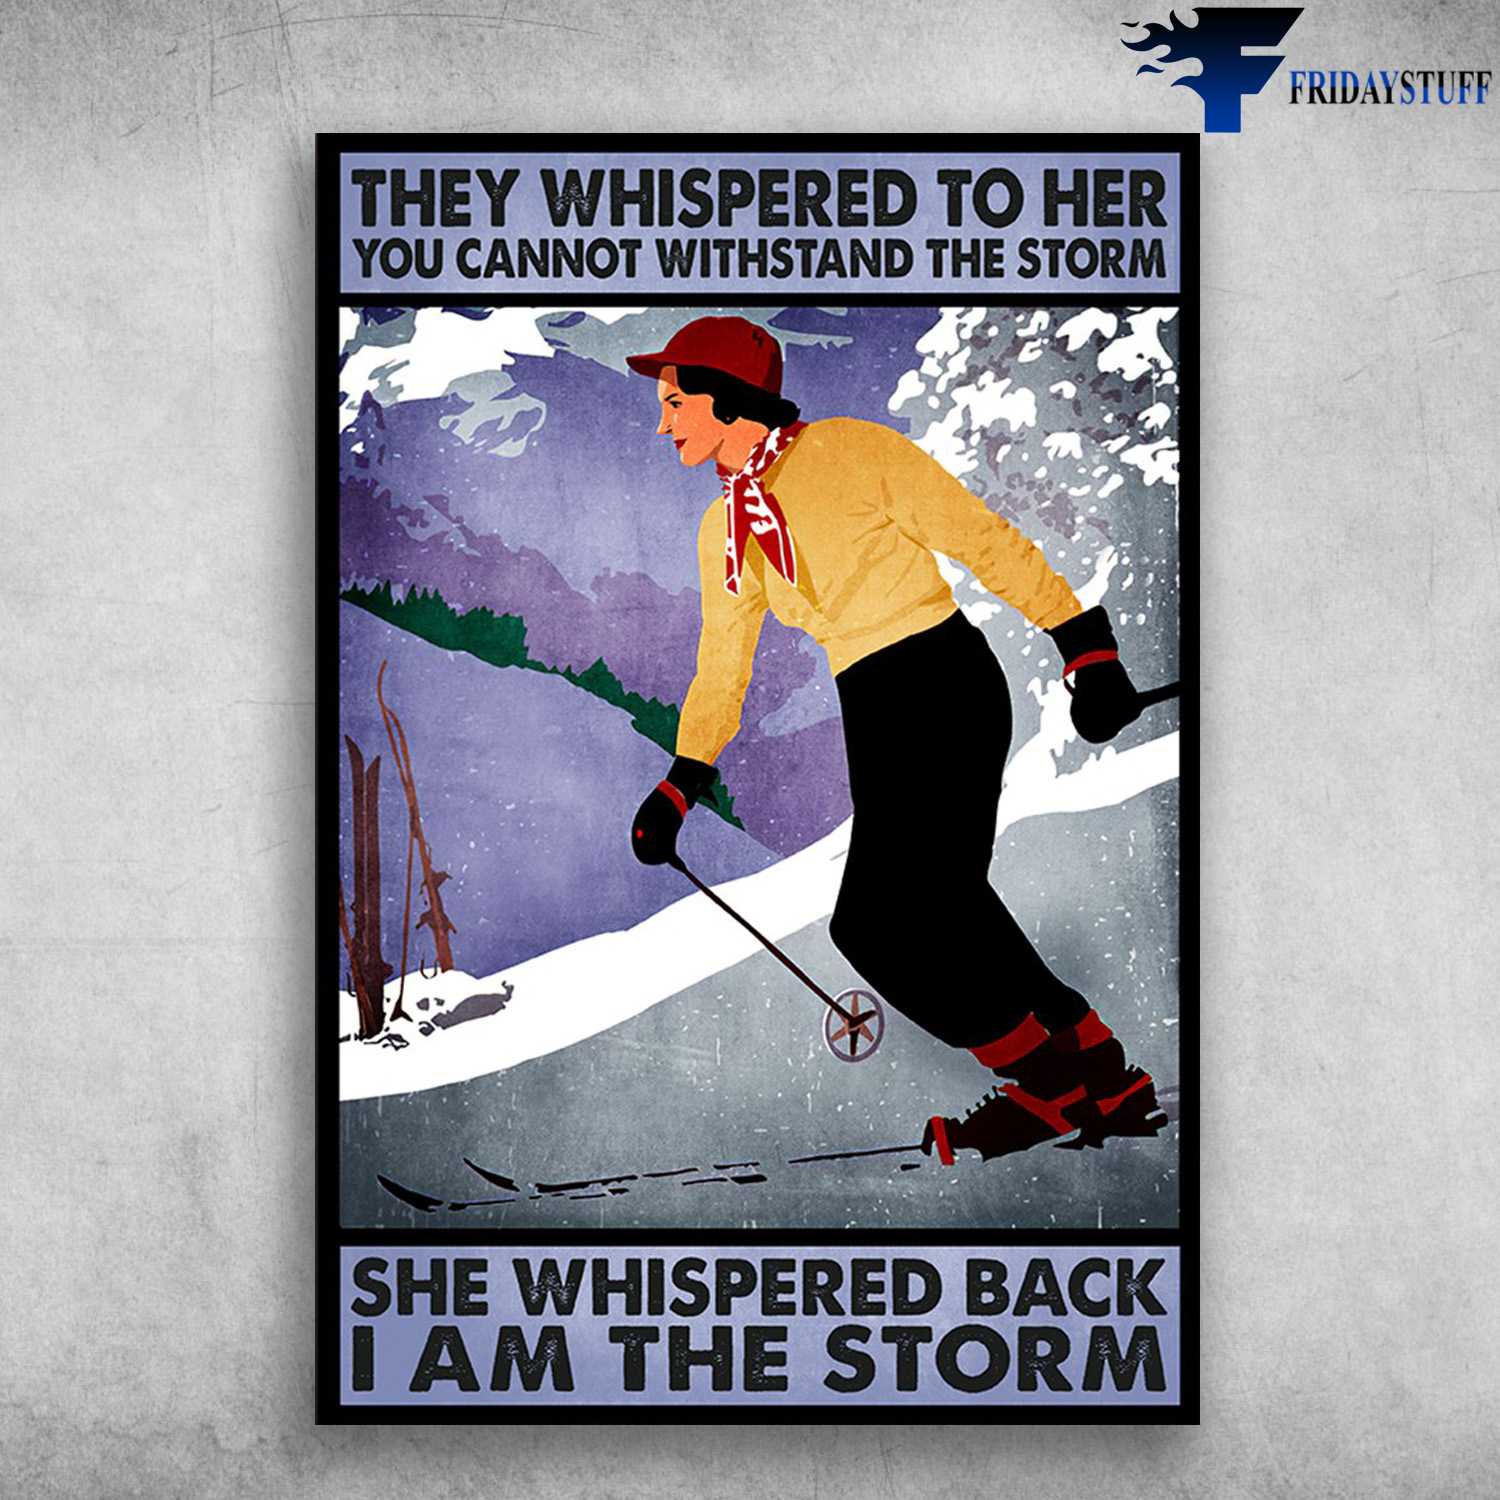 Lady Skiing - They Whispered To Her, You Cannot Withstand The Storm, She Whispered Back, I Am The Storm